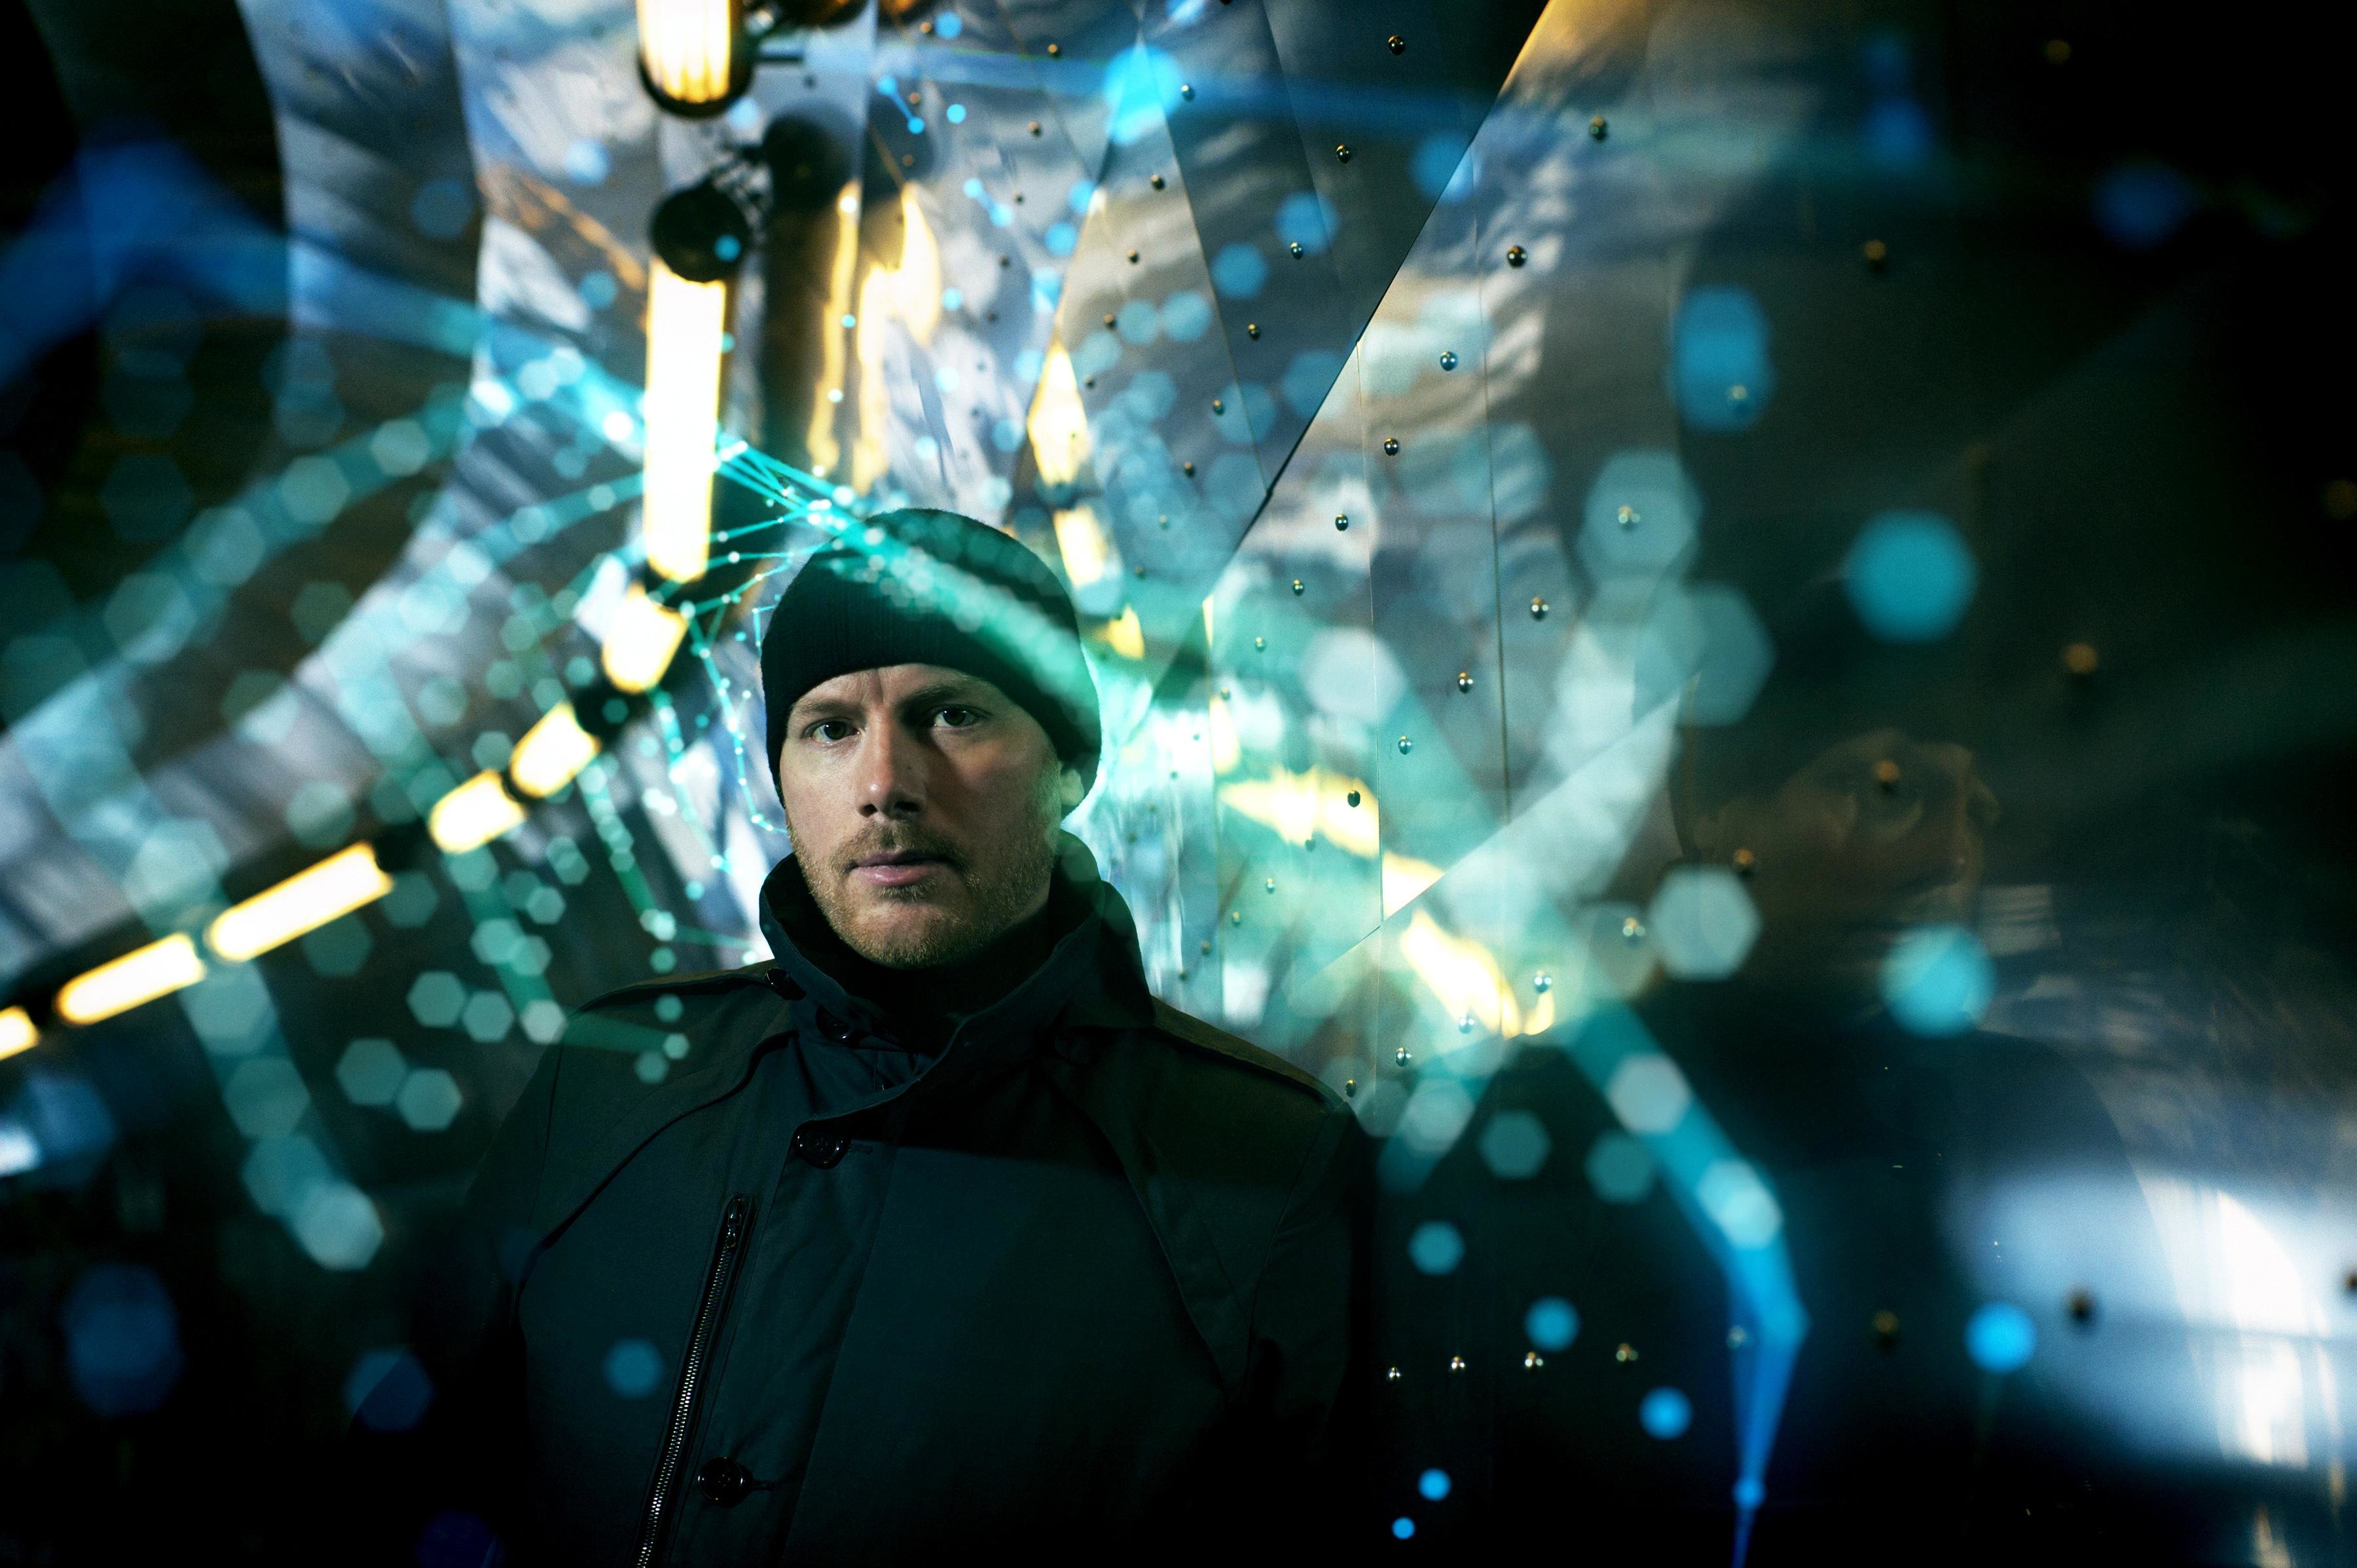 HQ Eric Prydz Wallpapers | File 958.79Kb